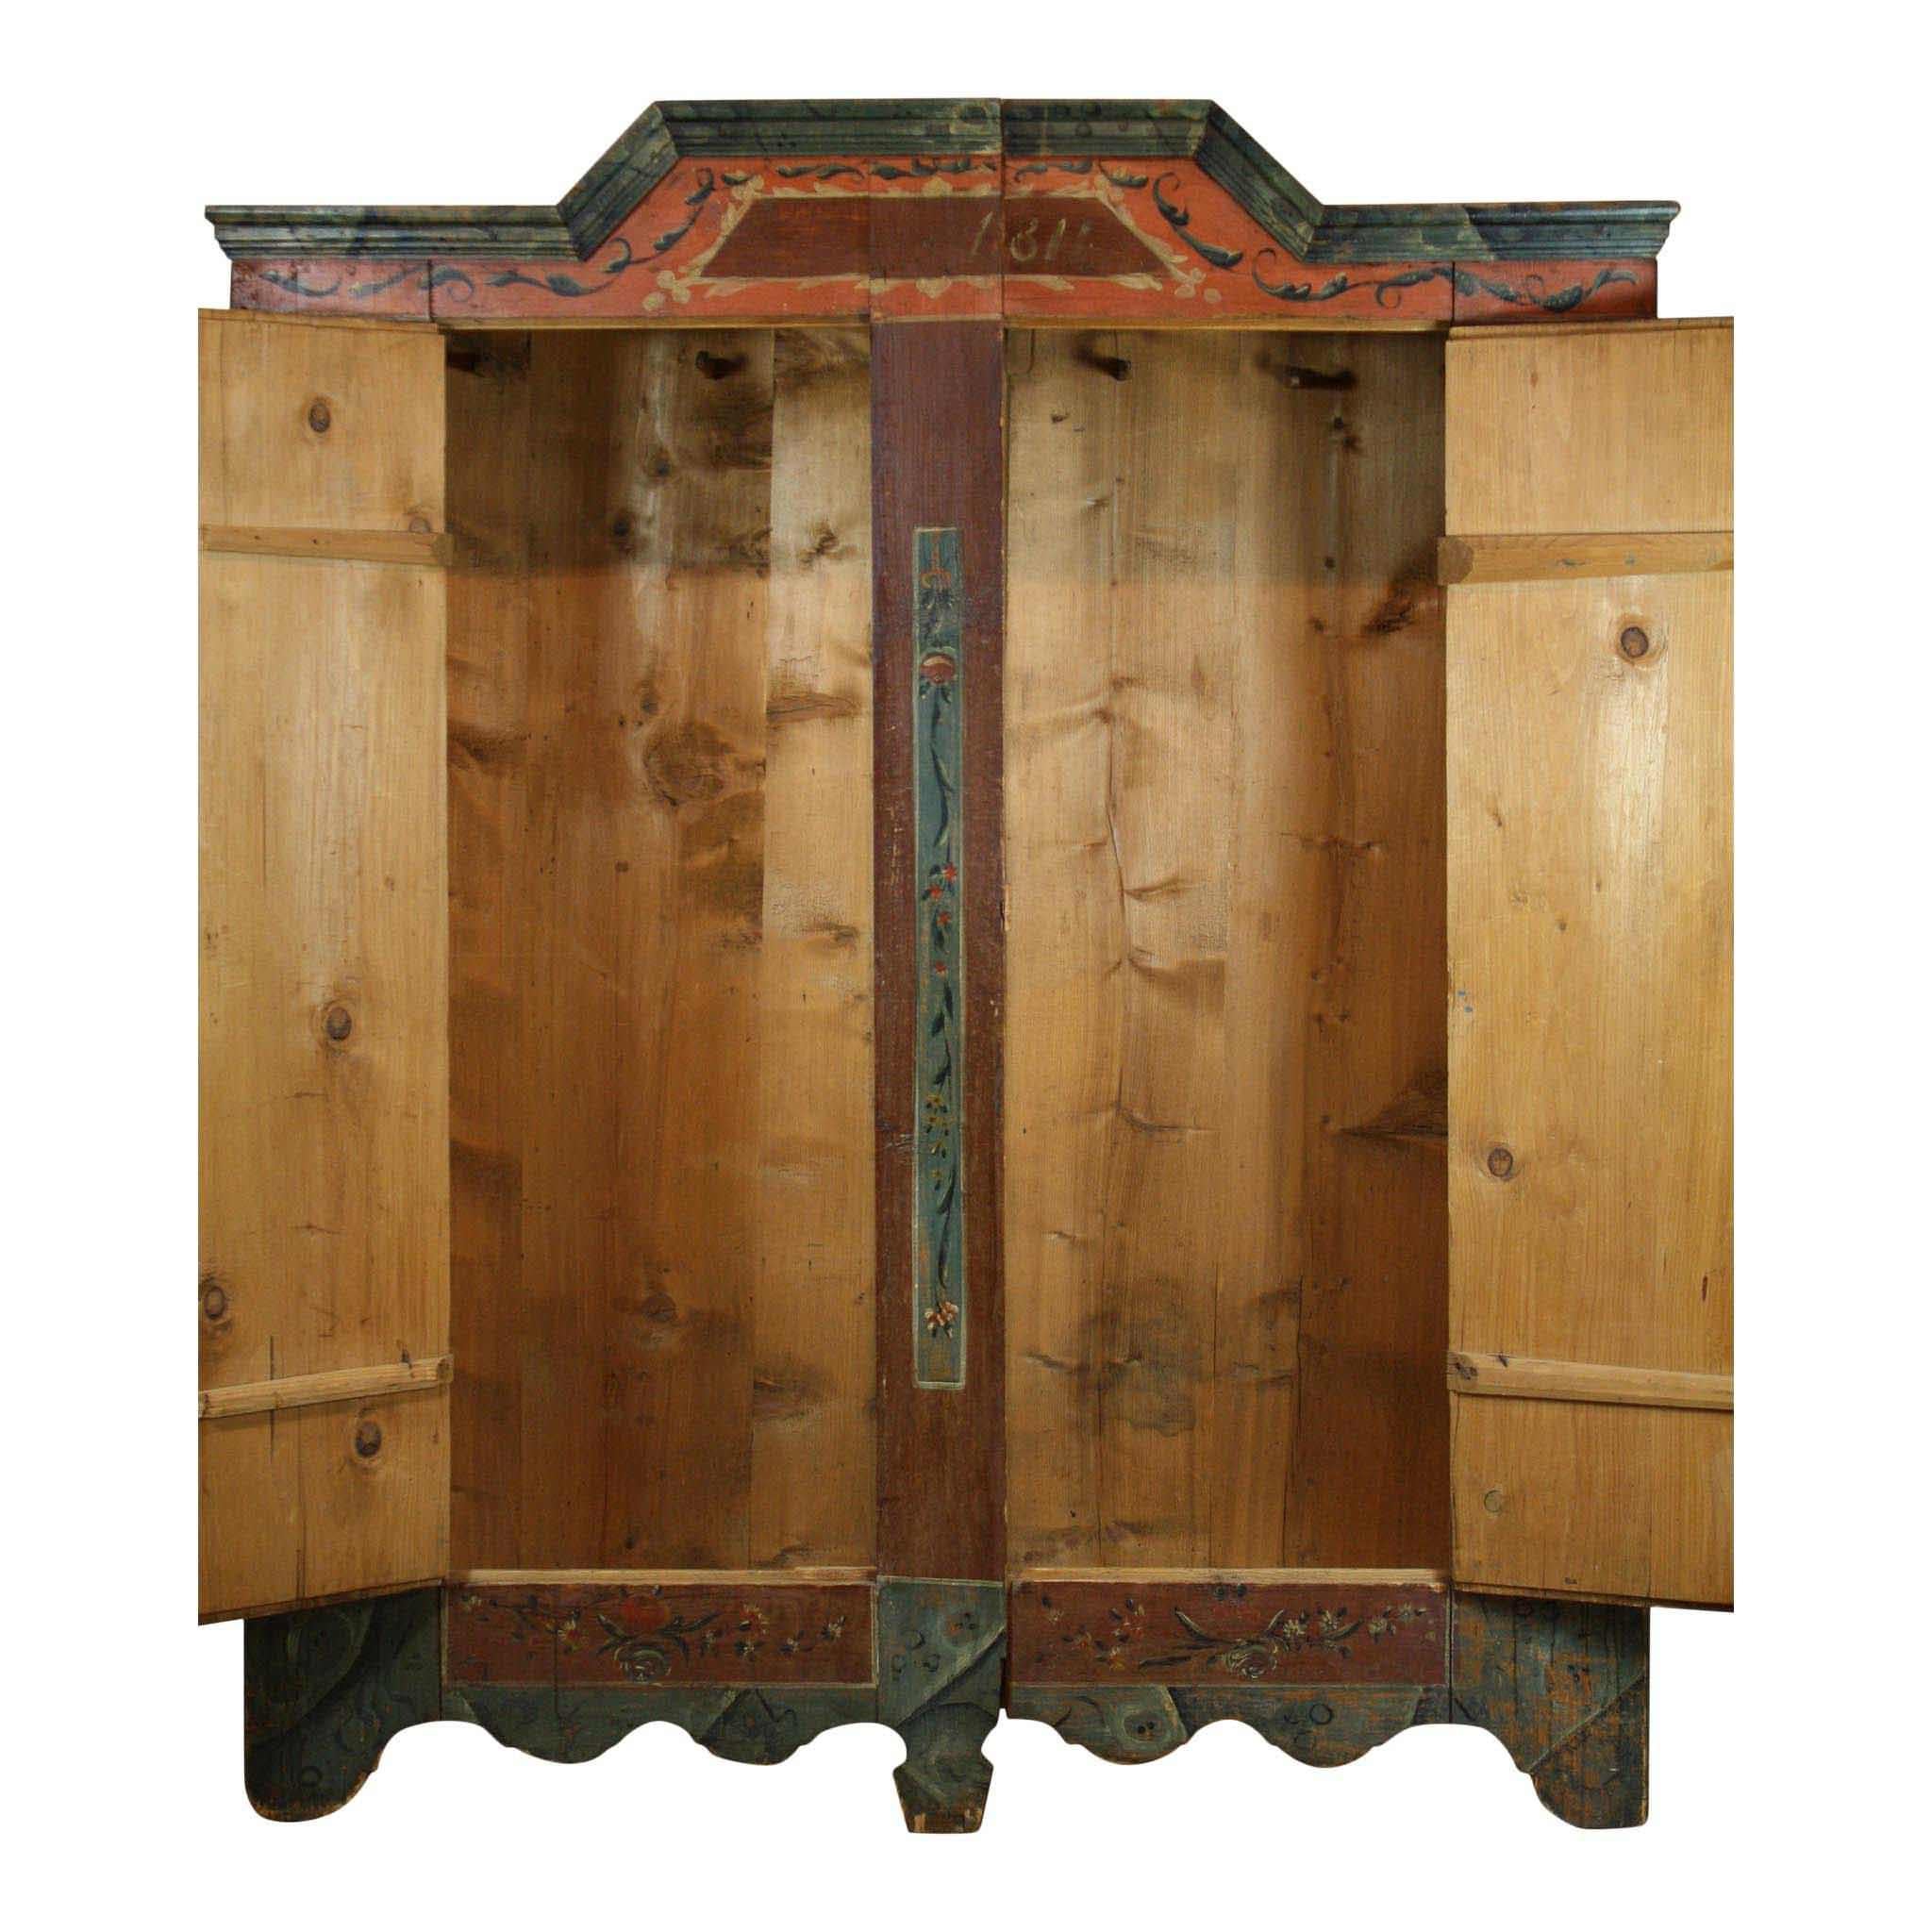 Dated 1811, this two-door armoire is beautifully hand-painted with a floral motif in rich, warm shades of green, orange, and brown. The top is crowned with an angled pediment. The base is trimmed with scalloped edges. Inside the wardrobe, there are